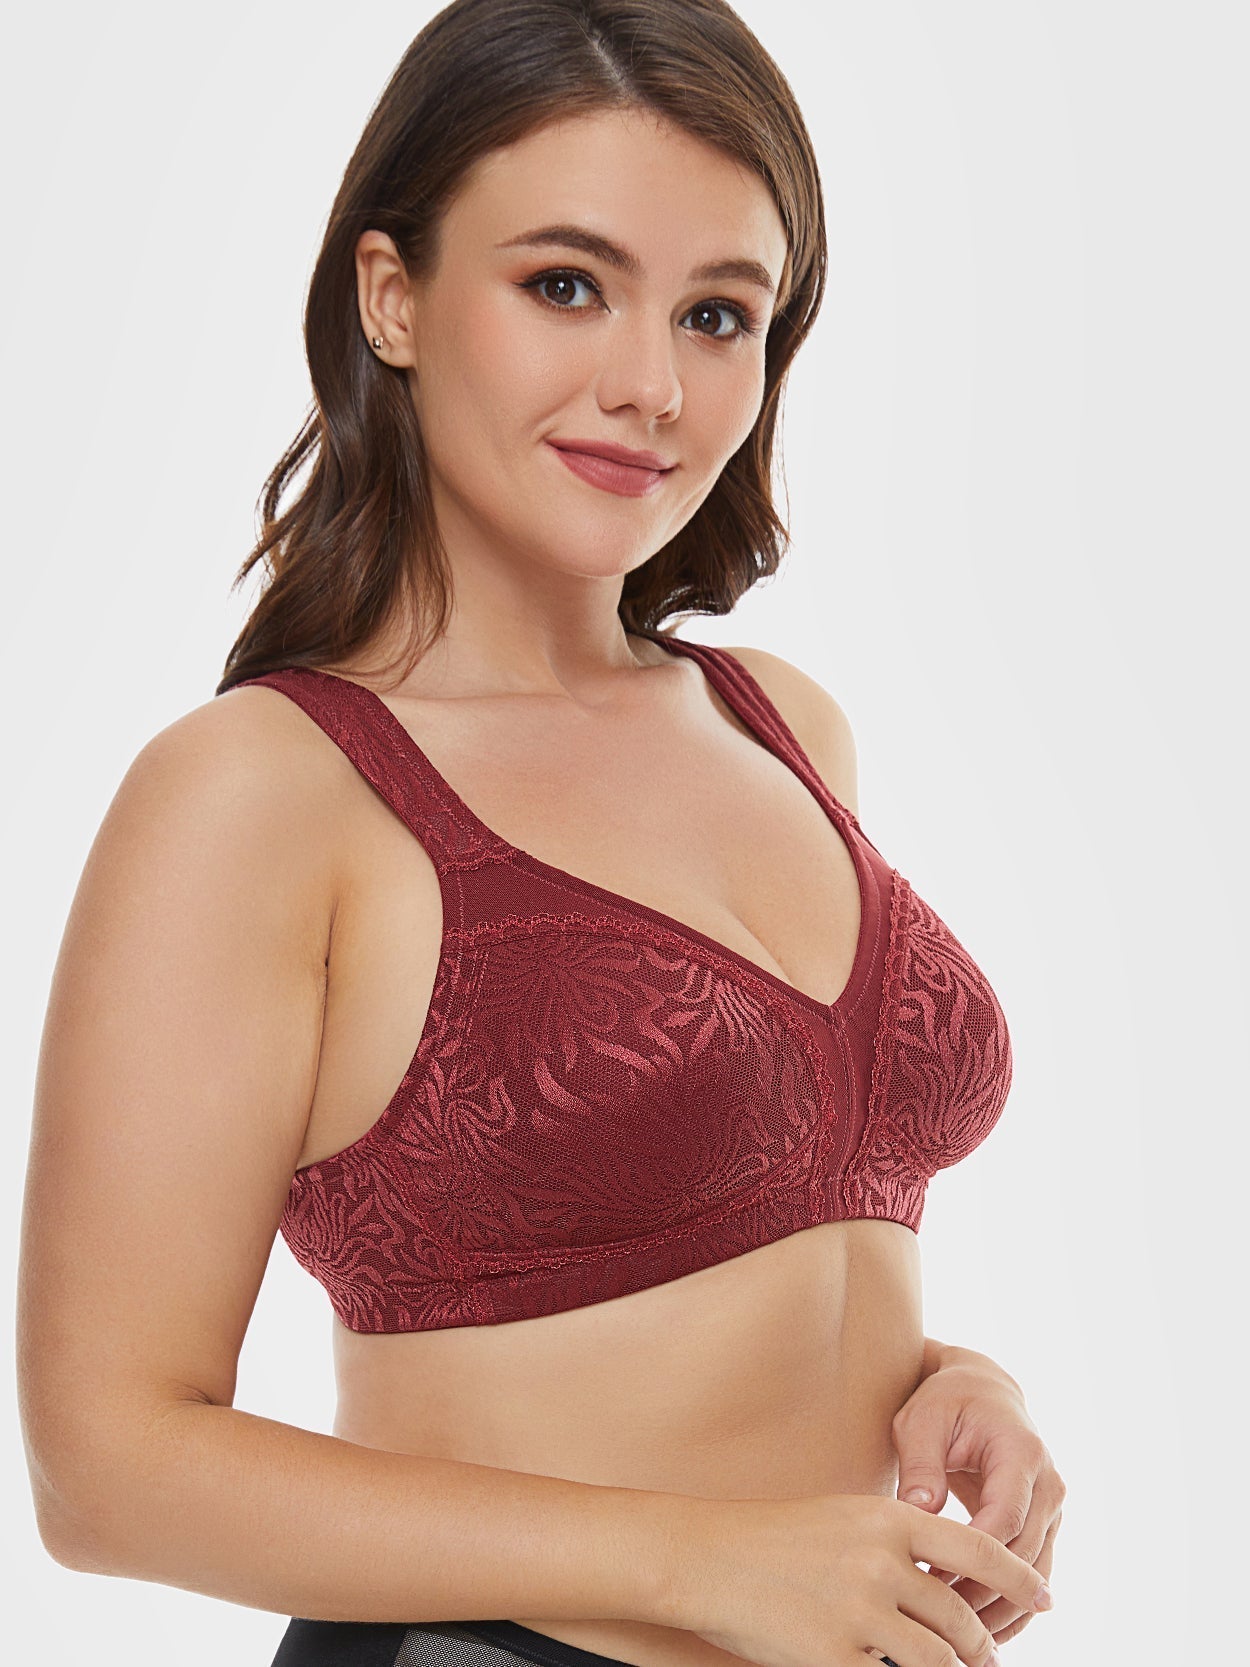 Featherline Padded Non Wired Full Coverage Minimiser Bra - Camel